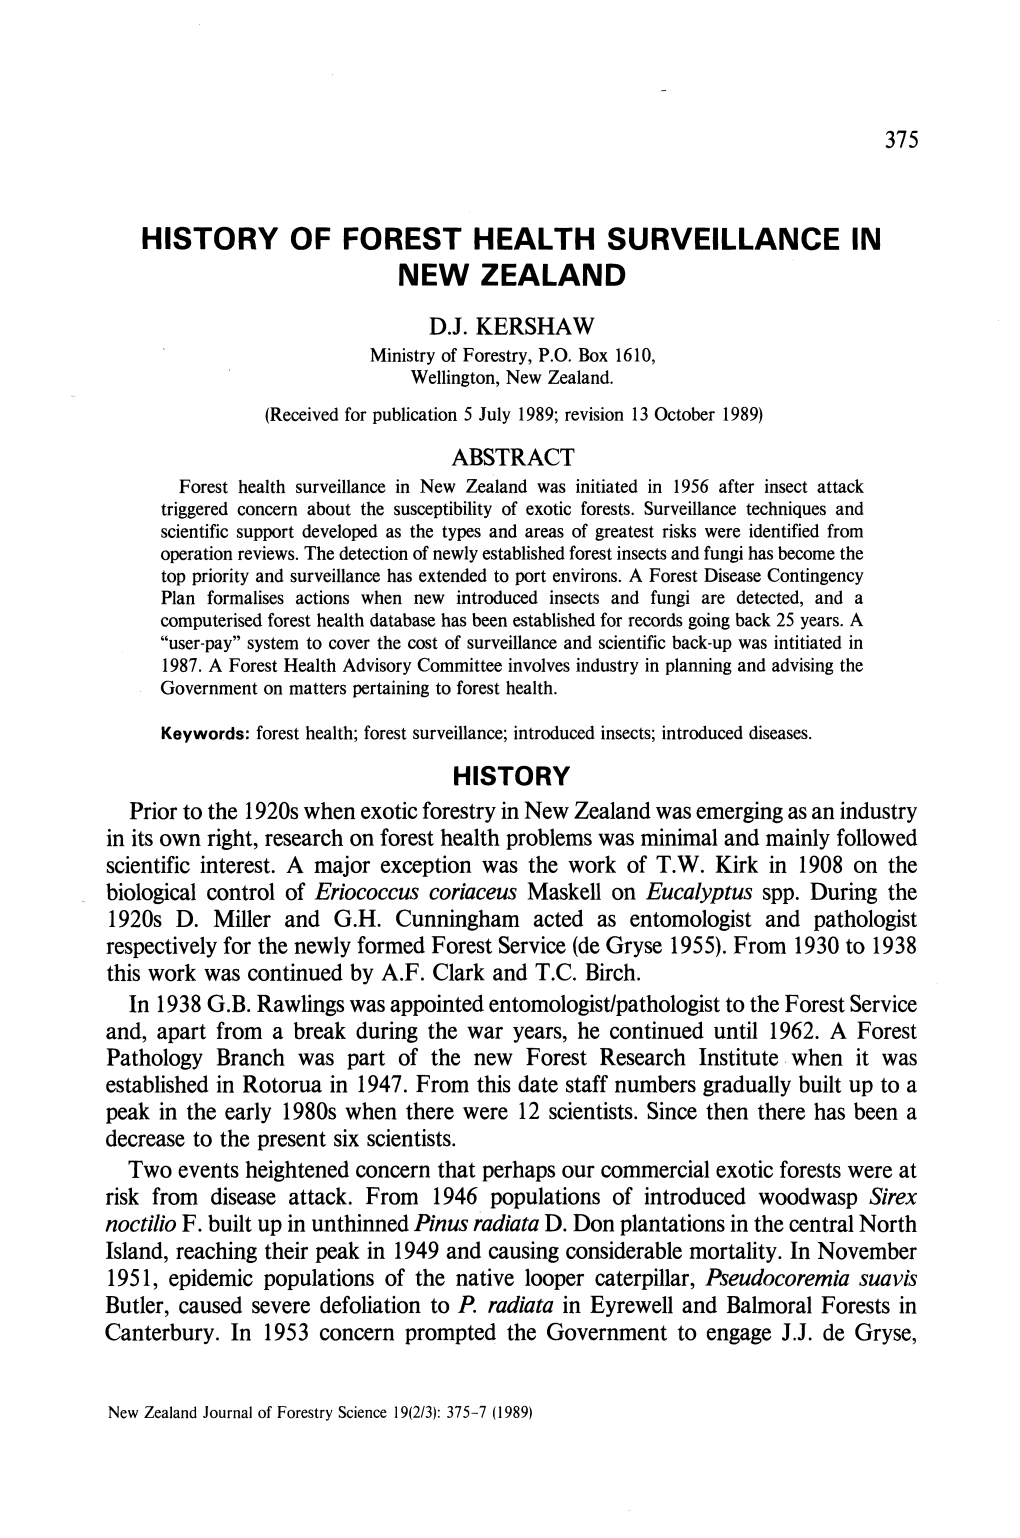 History of Forest Health Surveillance in New Zealand Dj